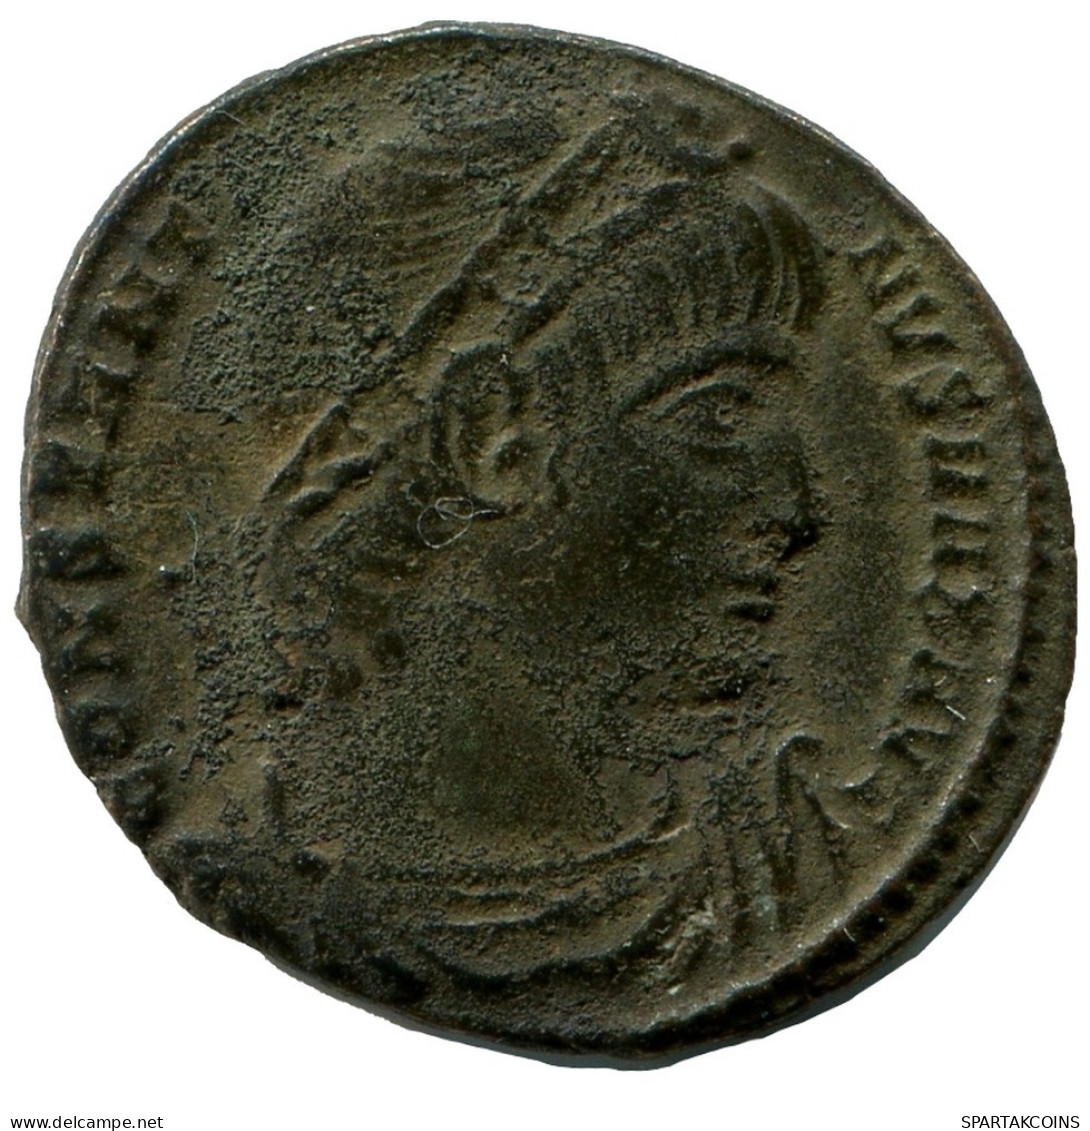 CONSTANTINE I MINTED IN CONSTANTINOPLE FOUND IN IHNASYAH HOARD #ANC10764.14.D.A - The Christian Empire (307 AD To 363 AD)